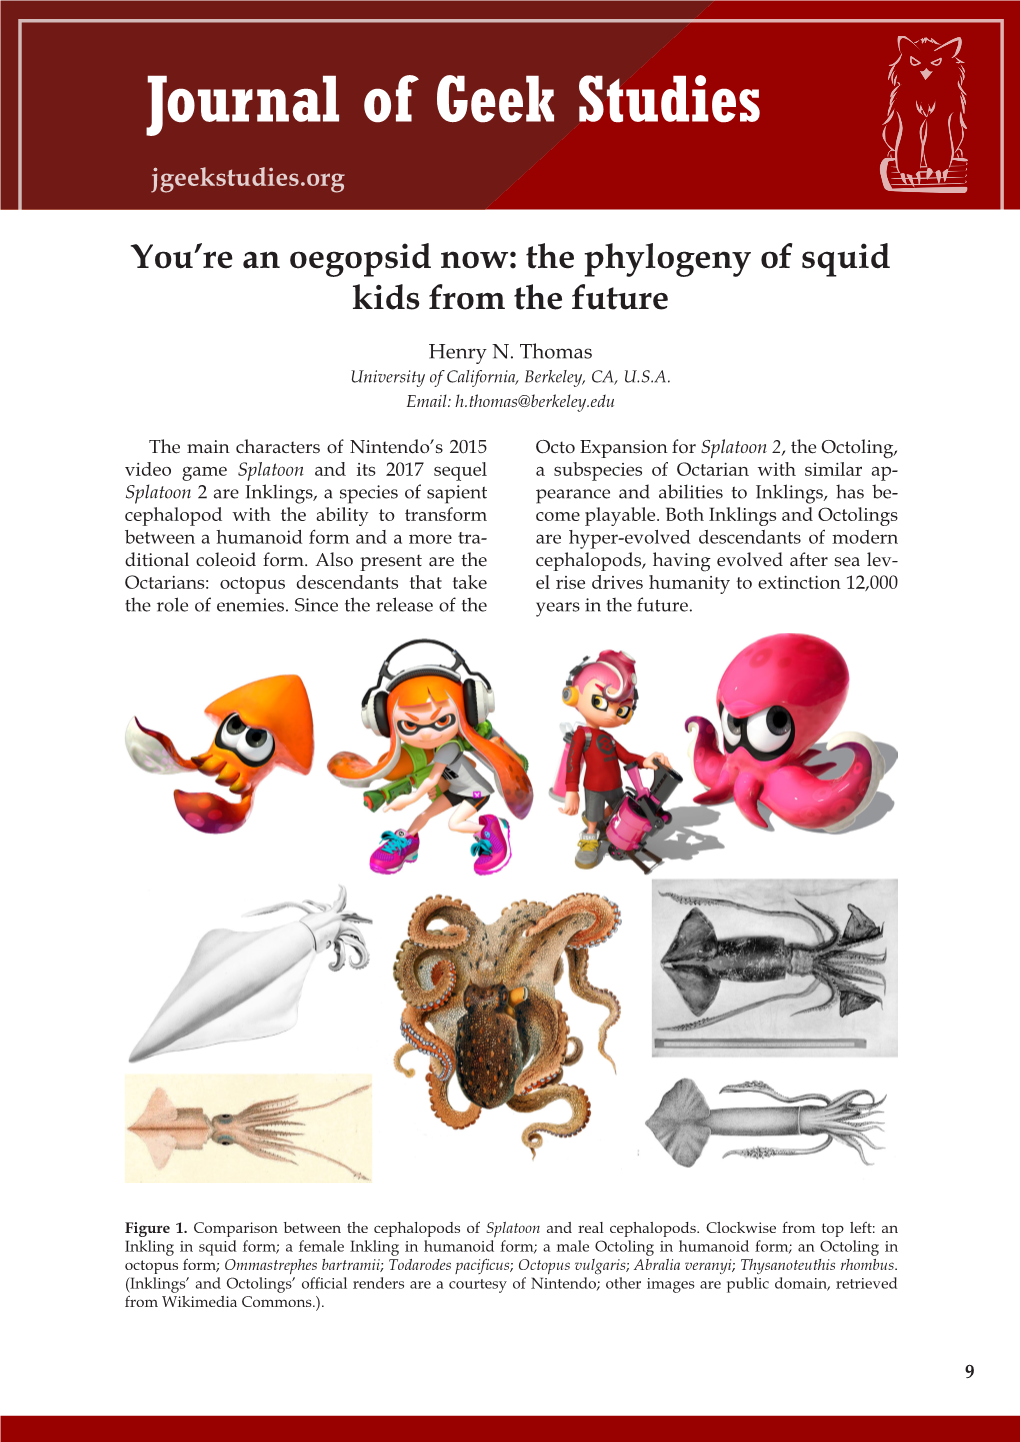 The Phylogeny of Squid Kids from the Future